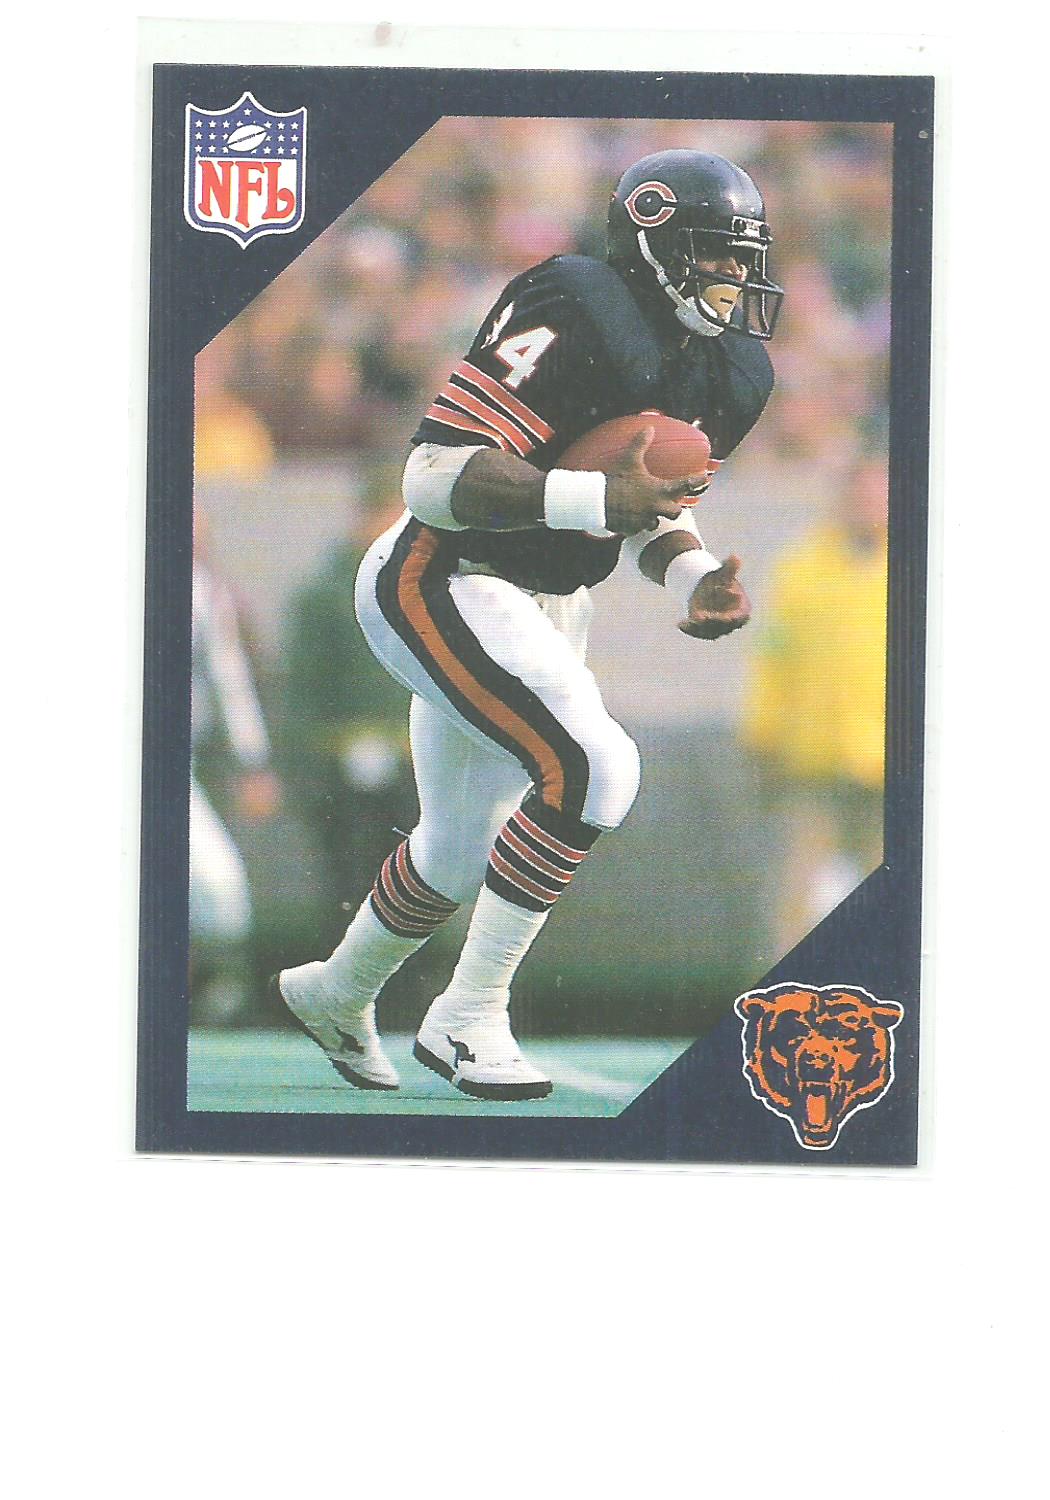 CHICAGOLAND WALTER PAYTON CHICAGO BEARS